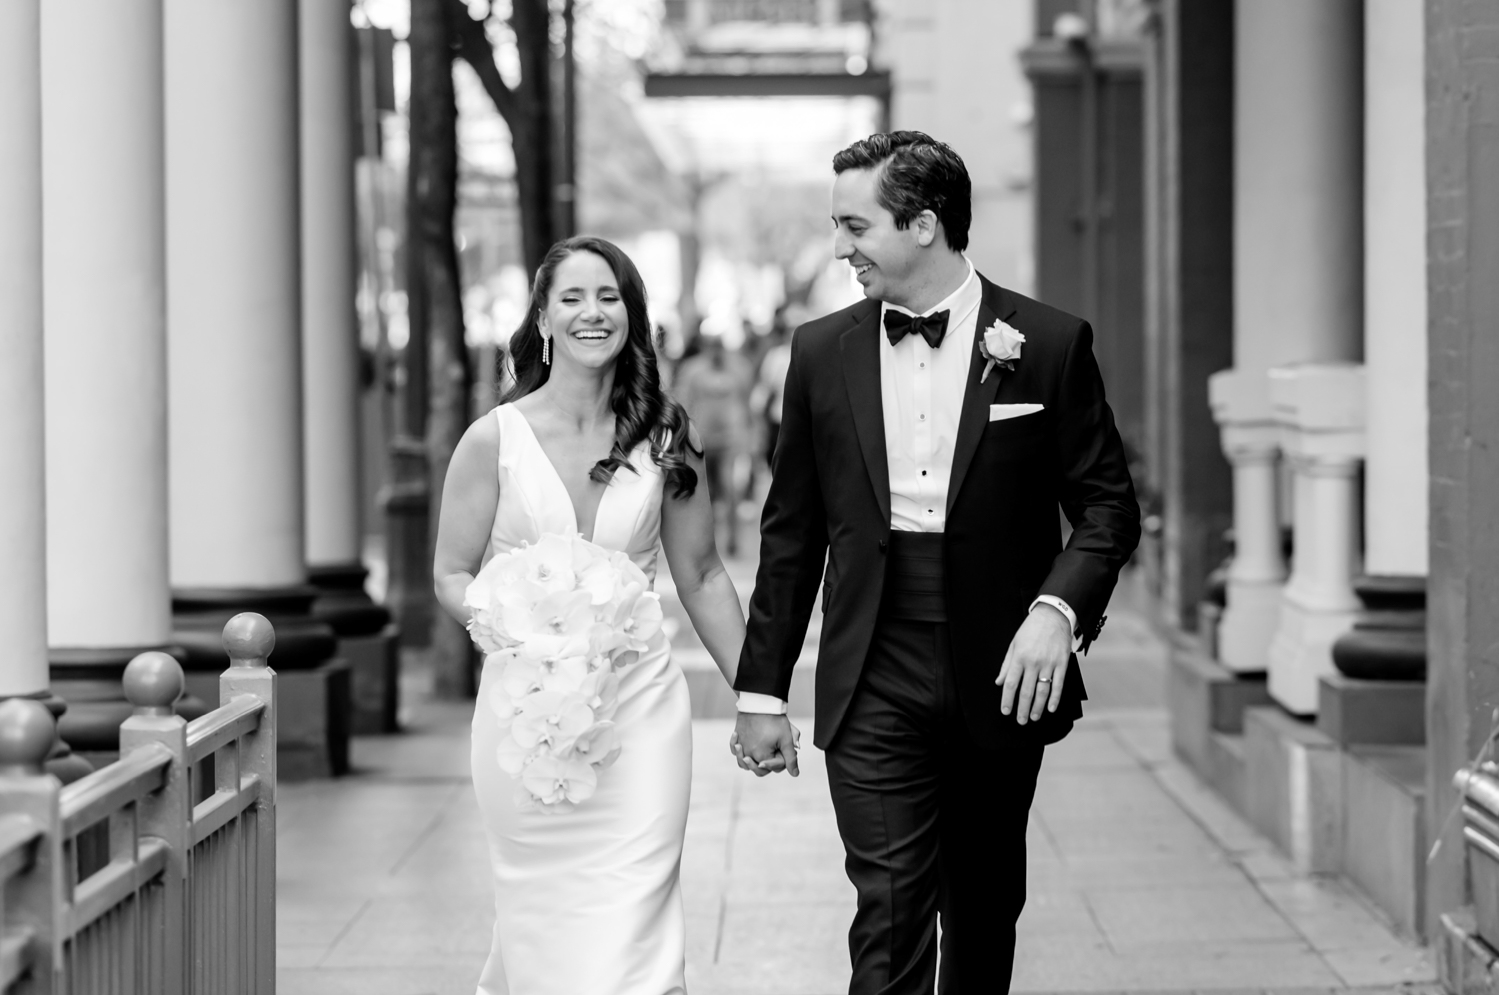 The bride and groom hold hands and laugh as they walk together in the streets of Austin, Texas.